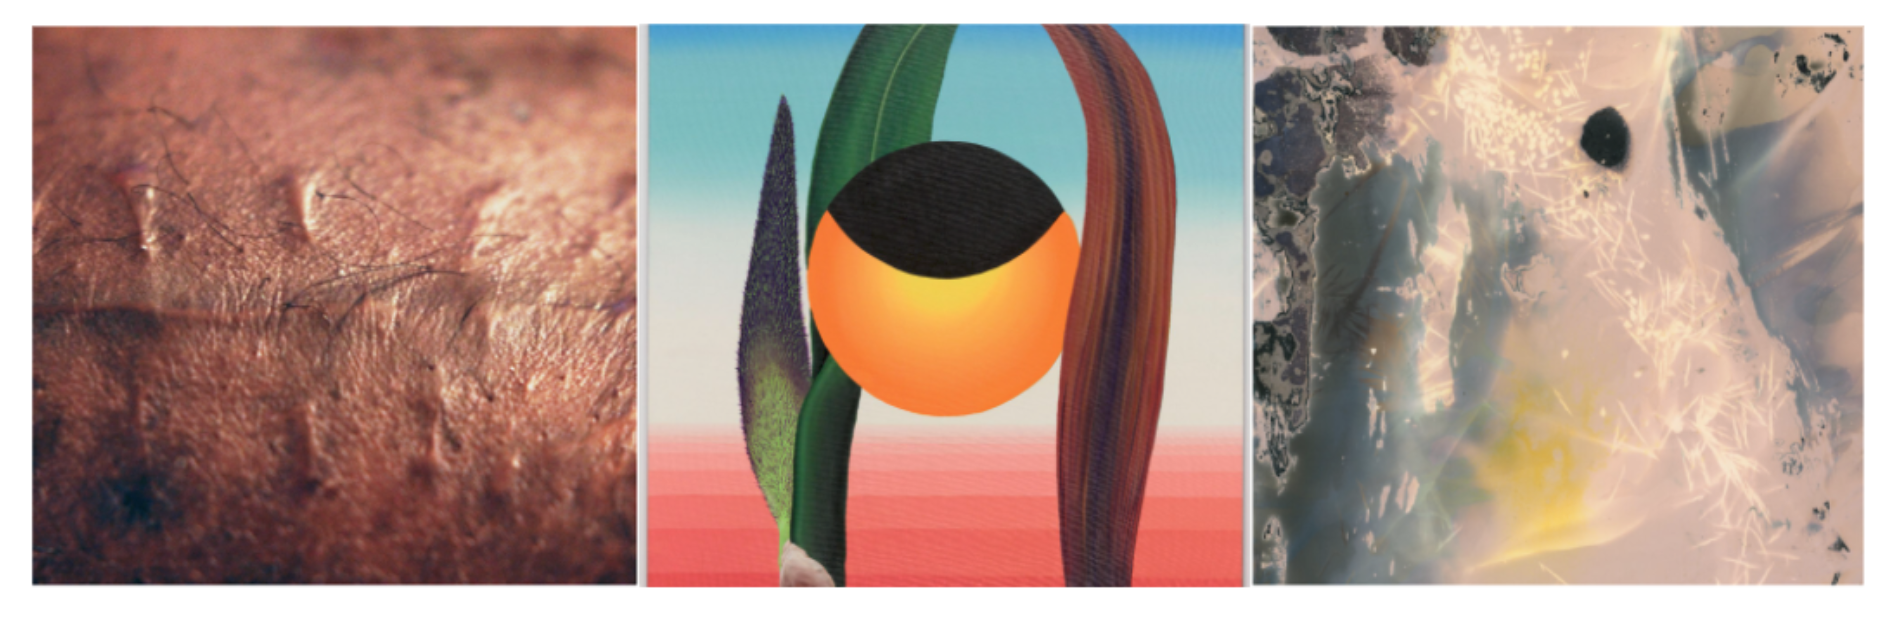 Three images in a row. From left to right, a close up detail of scarred skin, an abstract painting with leaves and a sun like orb, an abstract image with greys blues, white and yellow static designs.